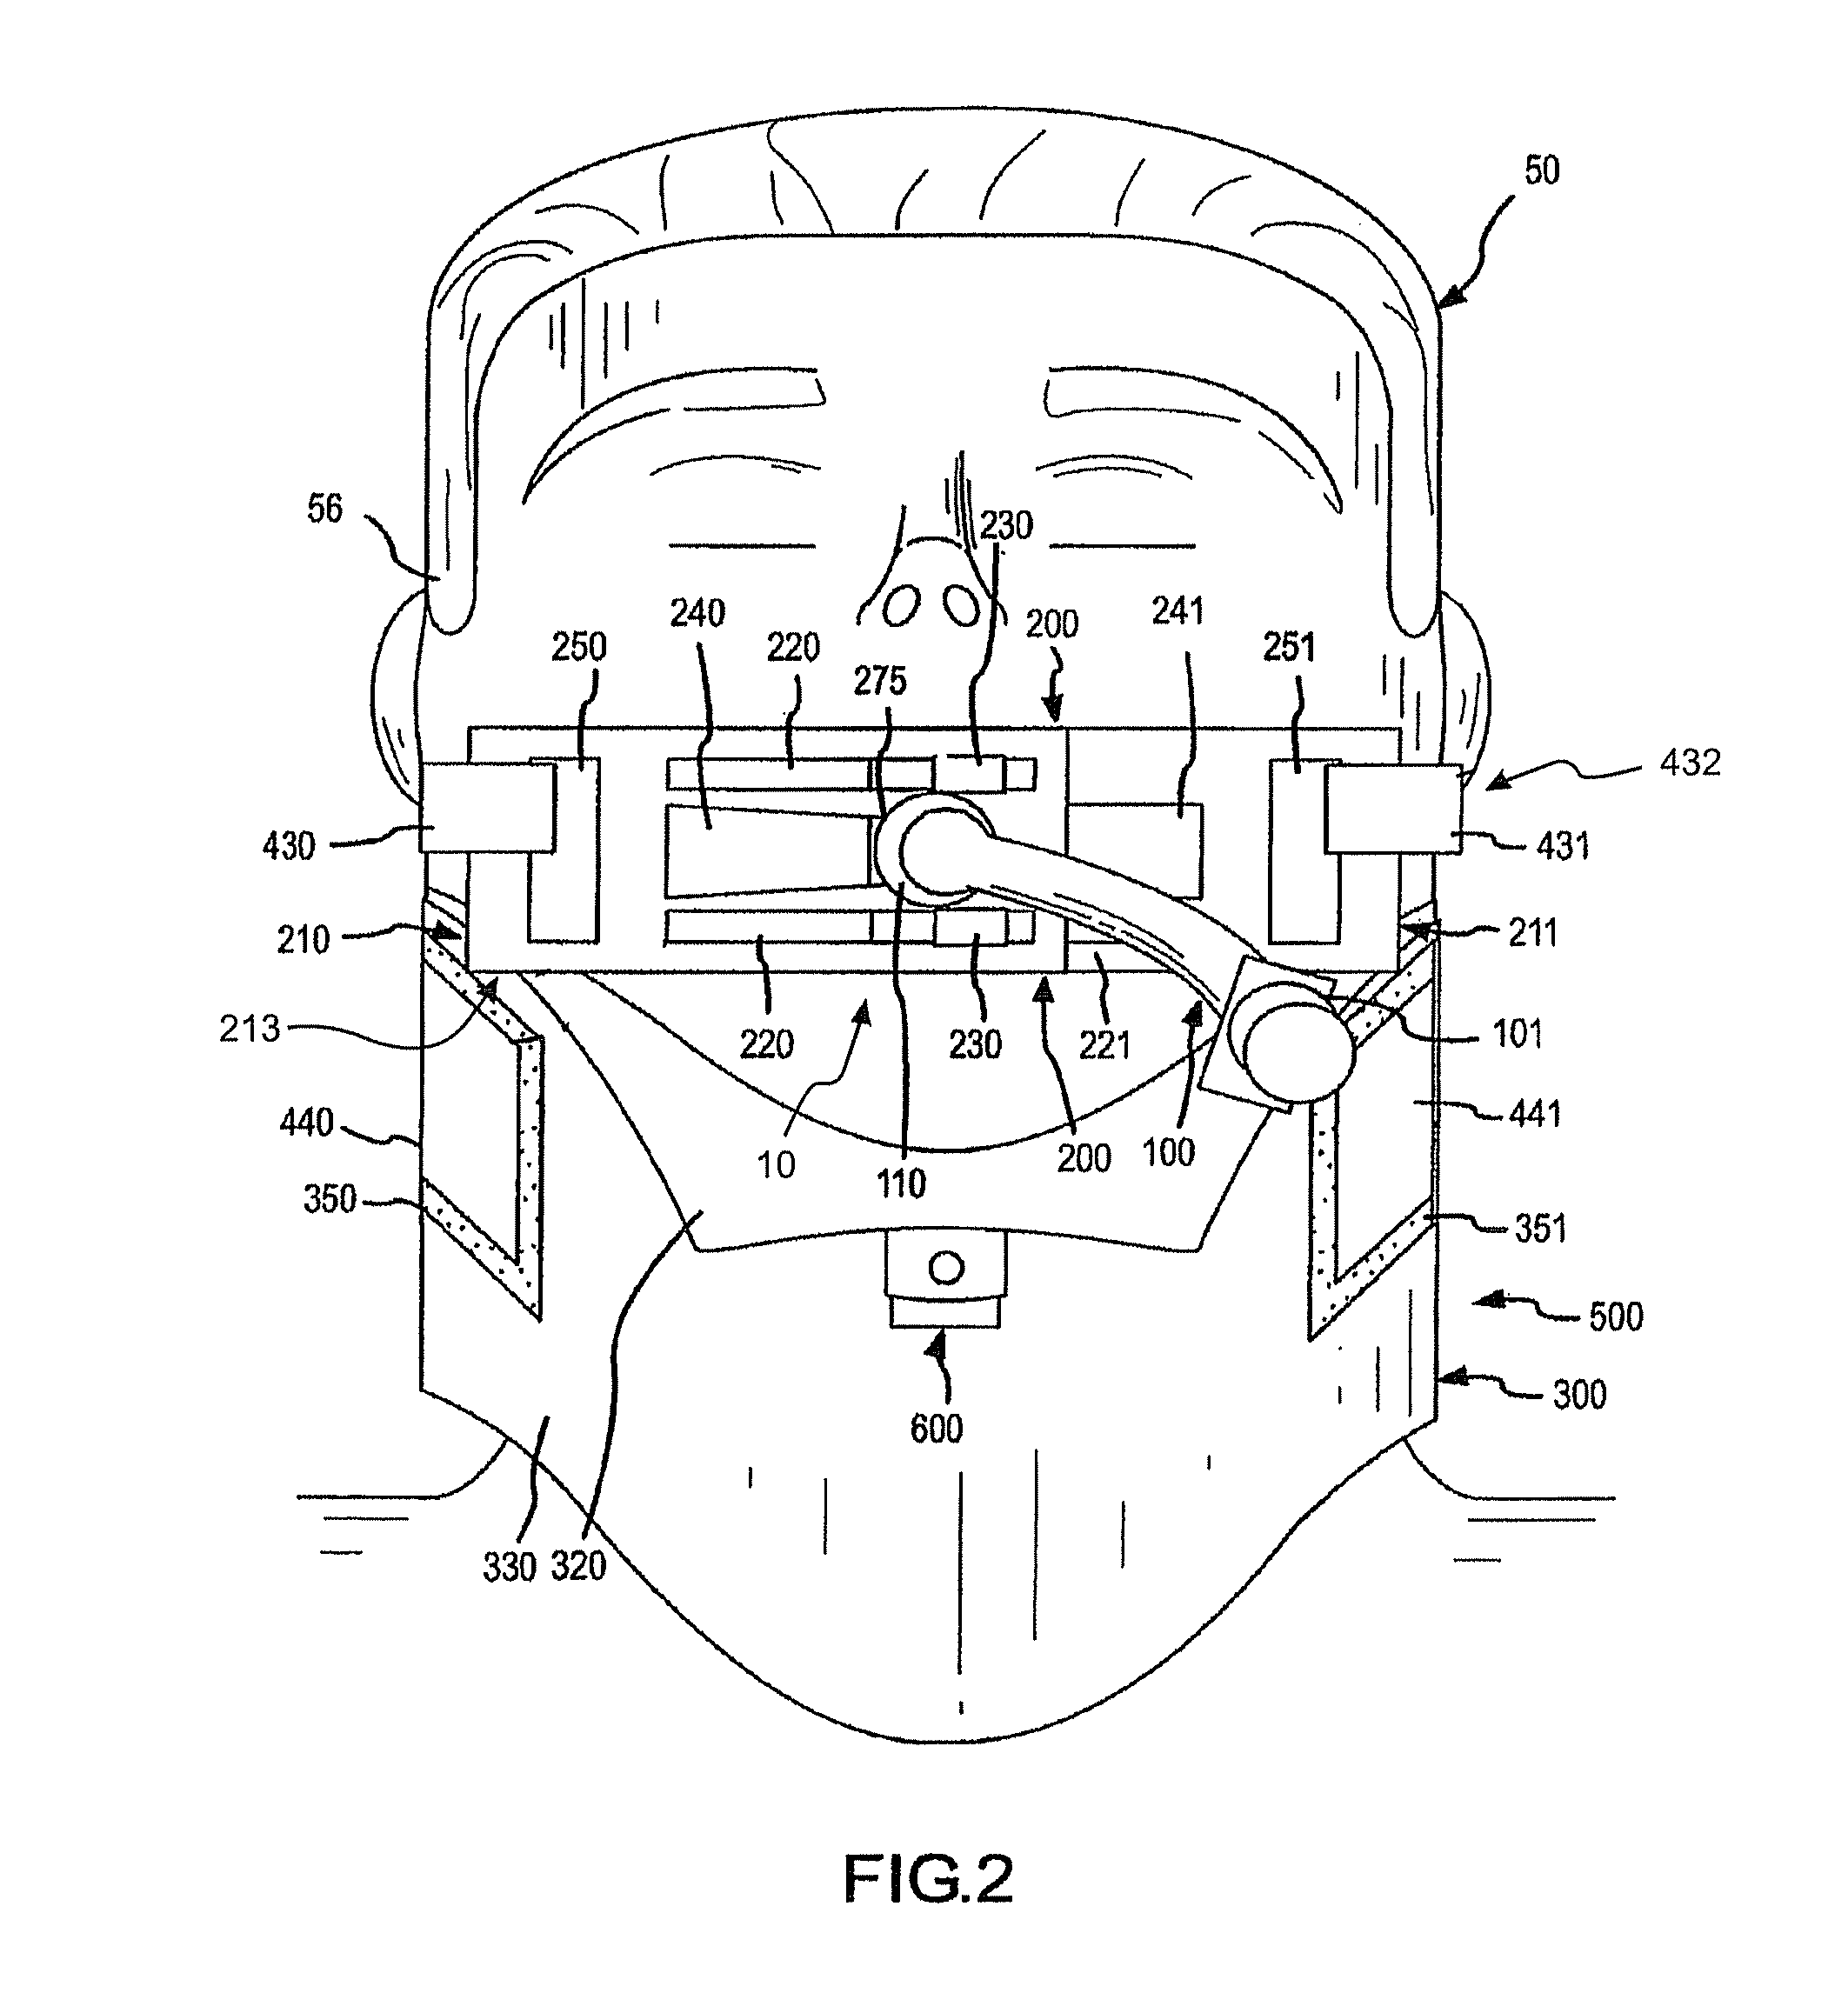 Complete airway stabilization system and method